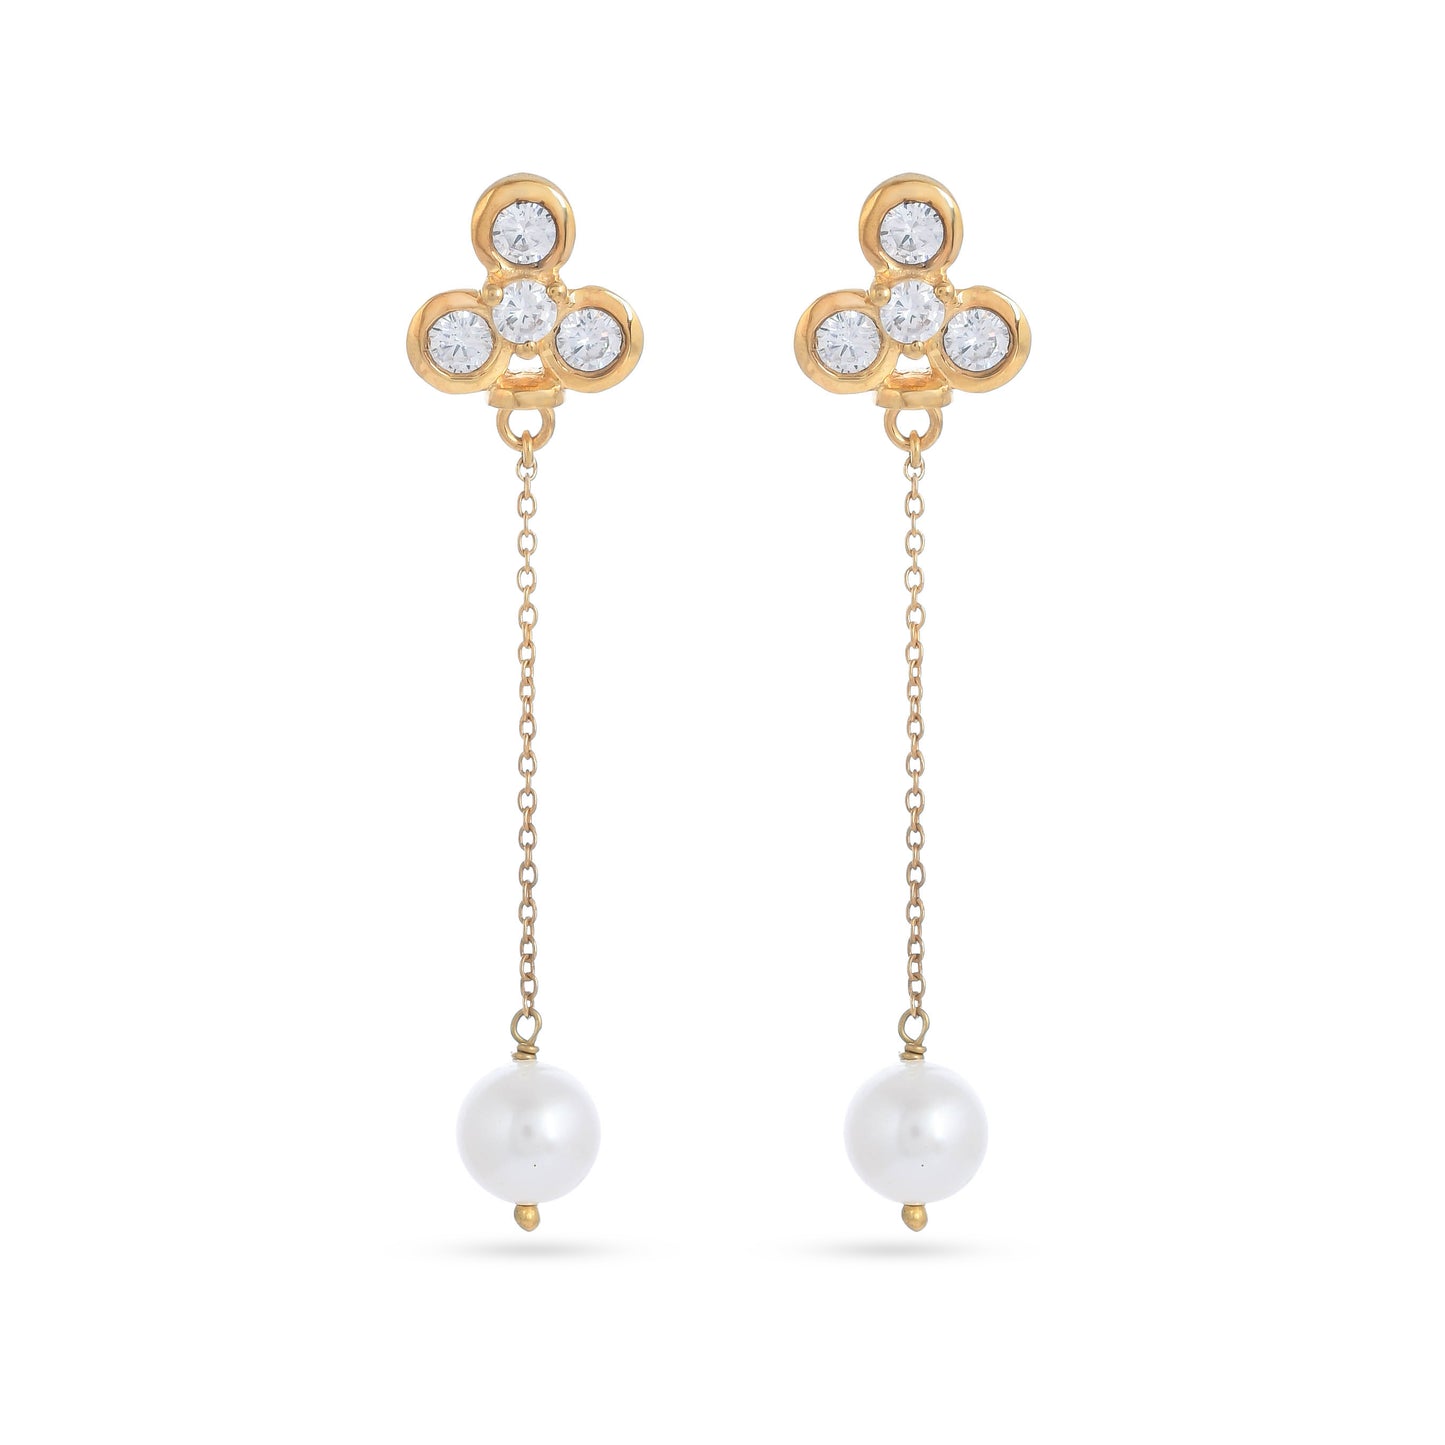 Elegant White Cz Pearl Silver Earring - From Purl Purl